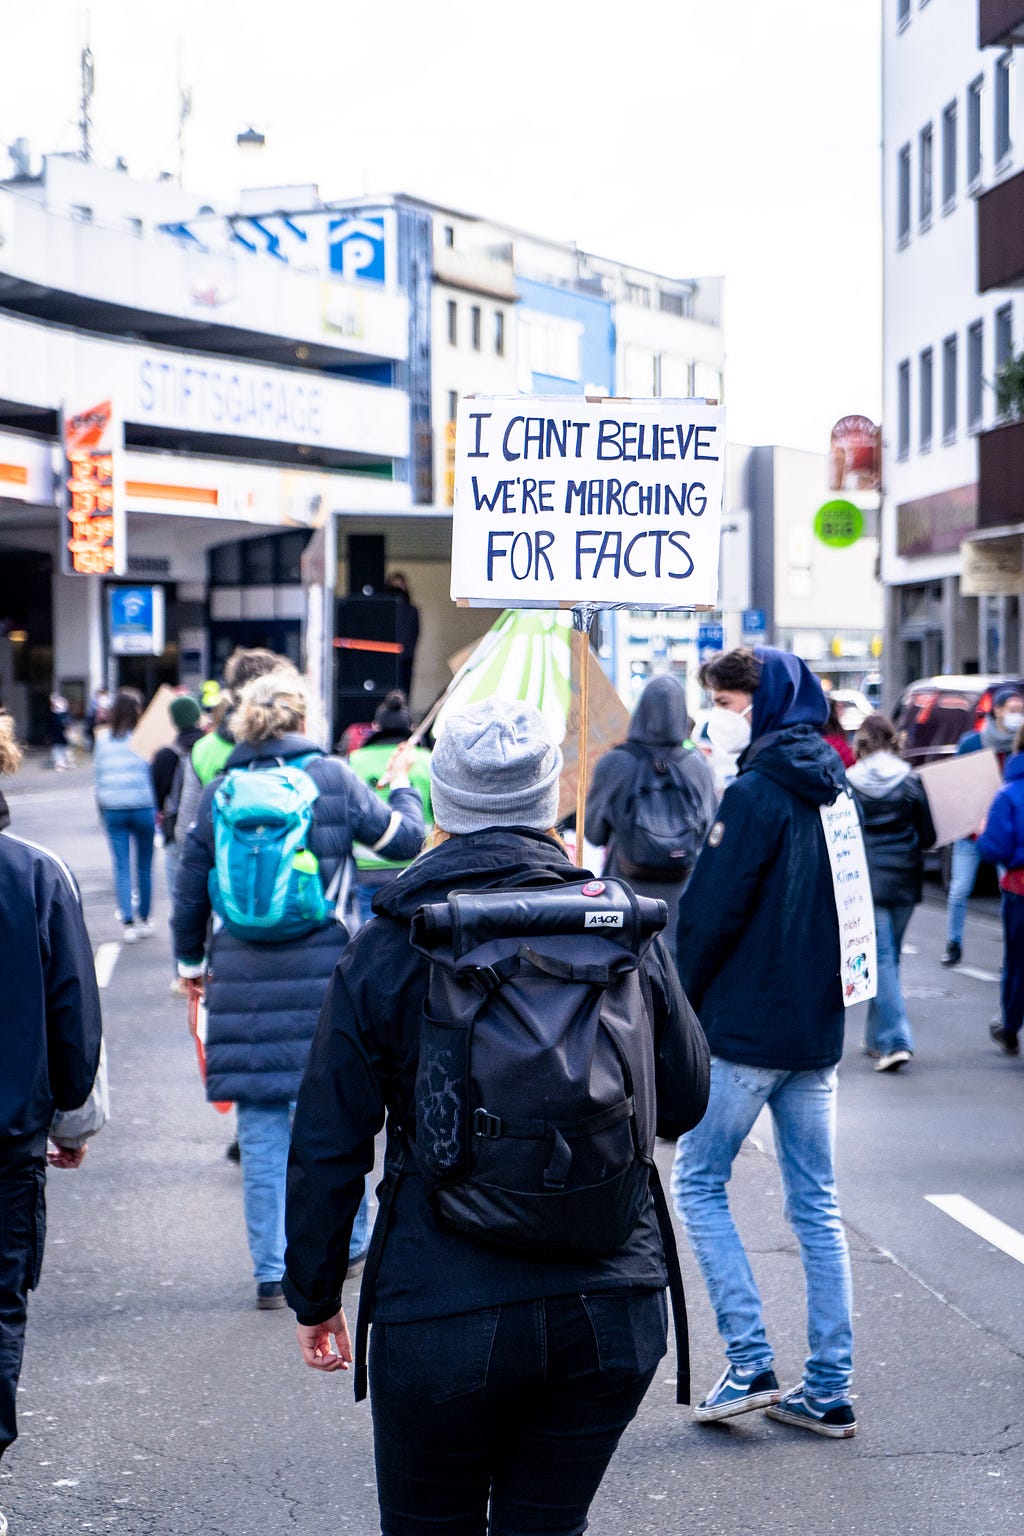 people marching for facts